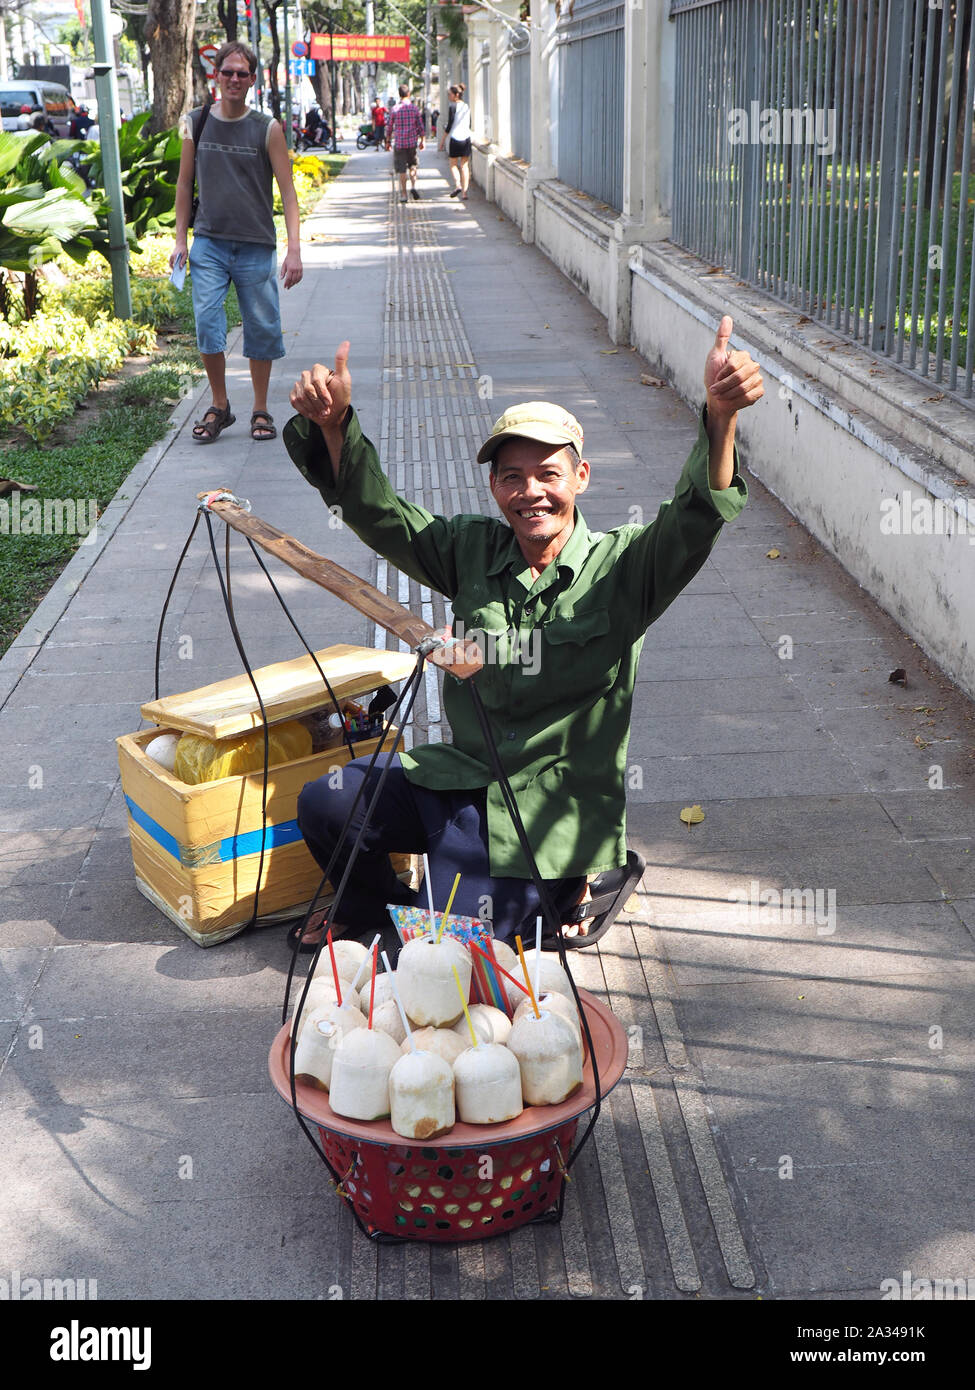 HANOI, VIETNAM, DECEMBER 15, 2014 : A peddler carrying a traditional balance is selling coconuts in the streets of Hanoi, Vietnam Stock Photo